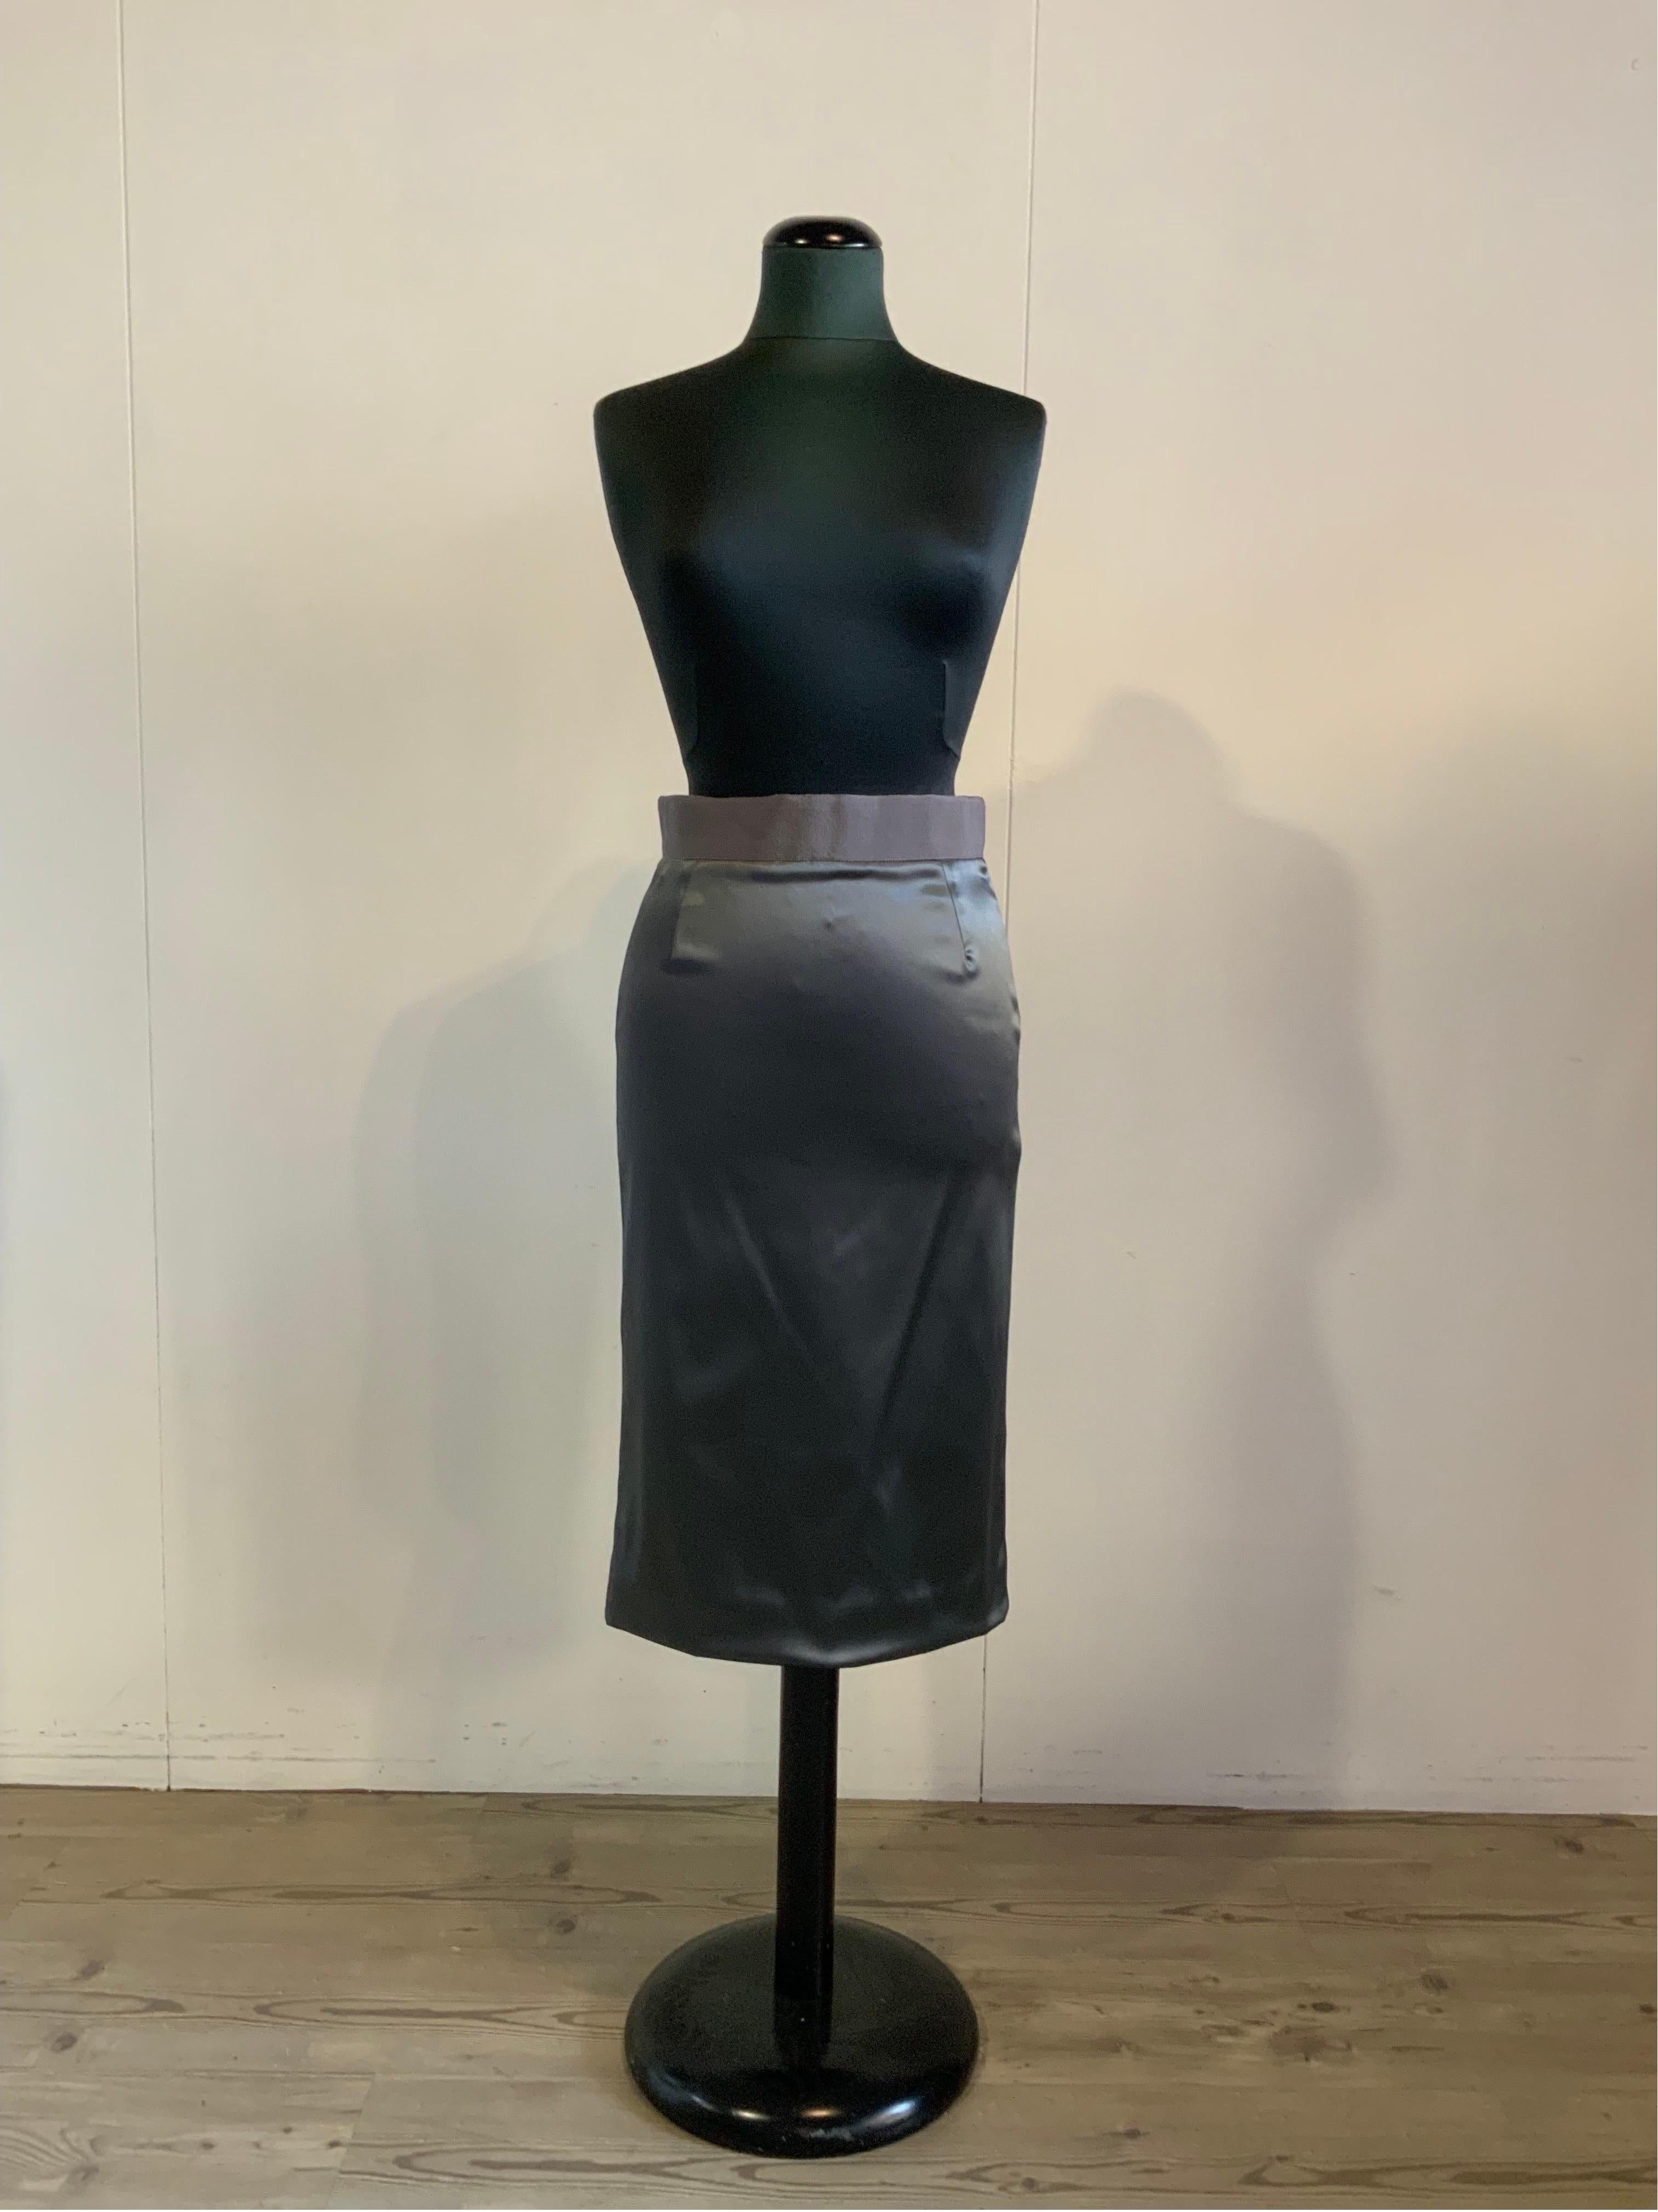 DOLCE AND GABBANA TUBE SKIRT.
In acetate, nylon and elastane. Lined.
Back zip closure.
Italian size 40.
Waist 35cm
Hips 44 cm
Length 69 cm
Excellent general condition, shows signs of normal use.